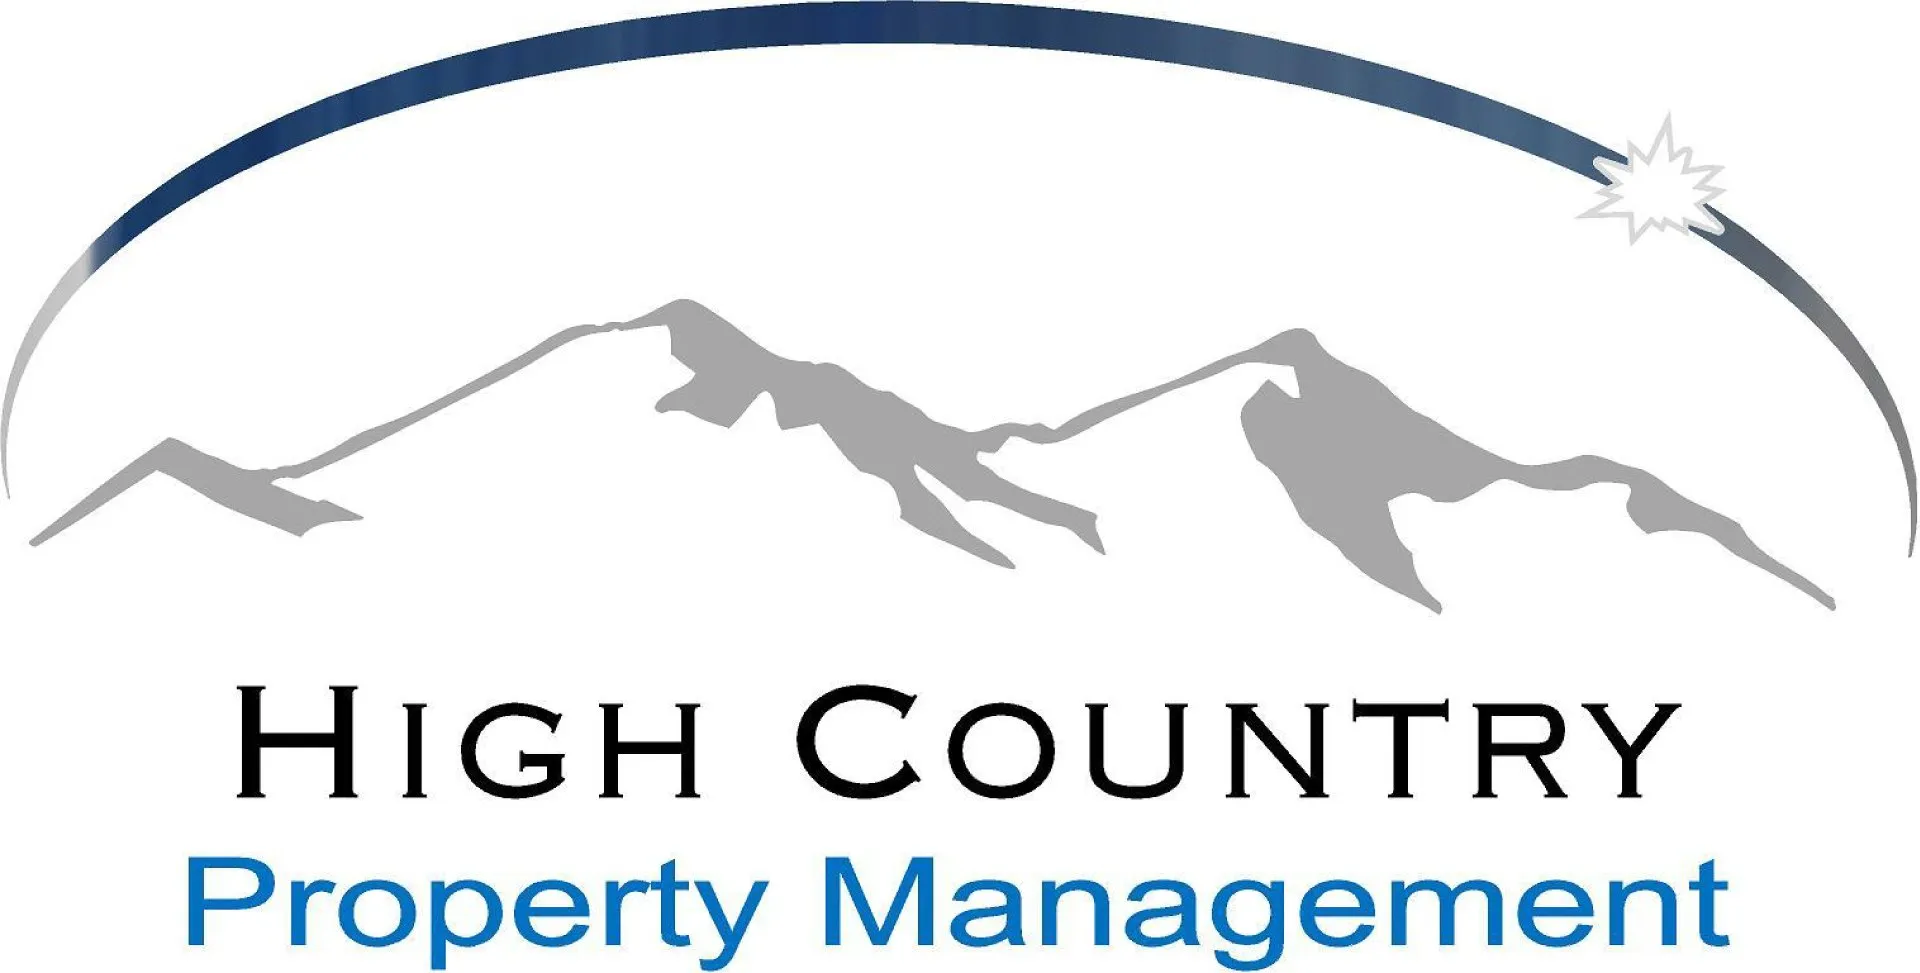 High Country Property Management